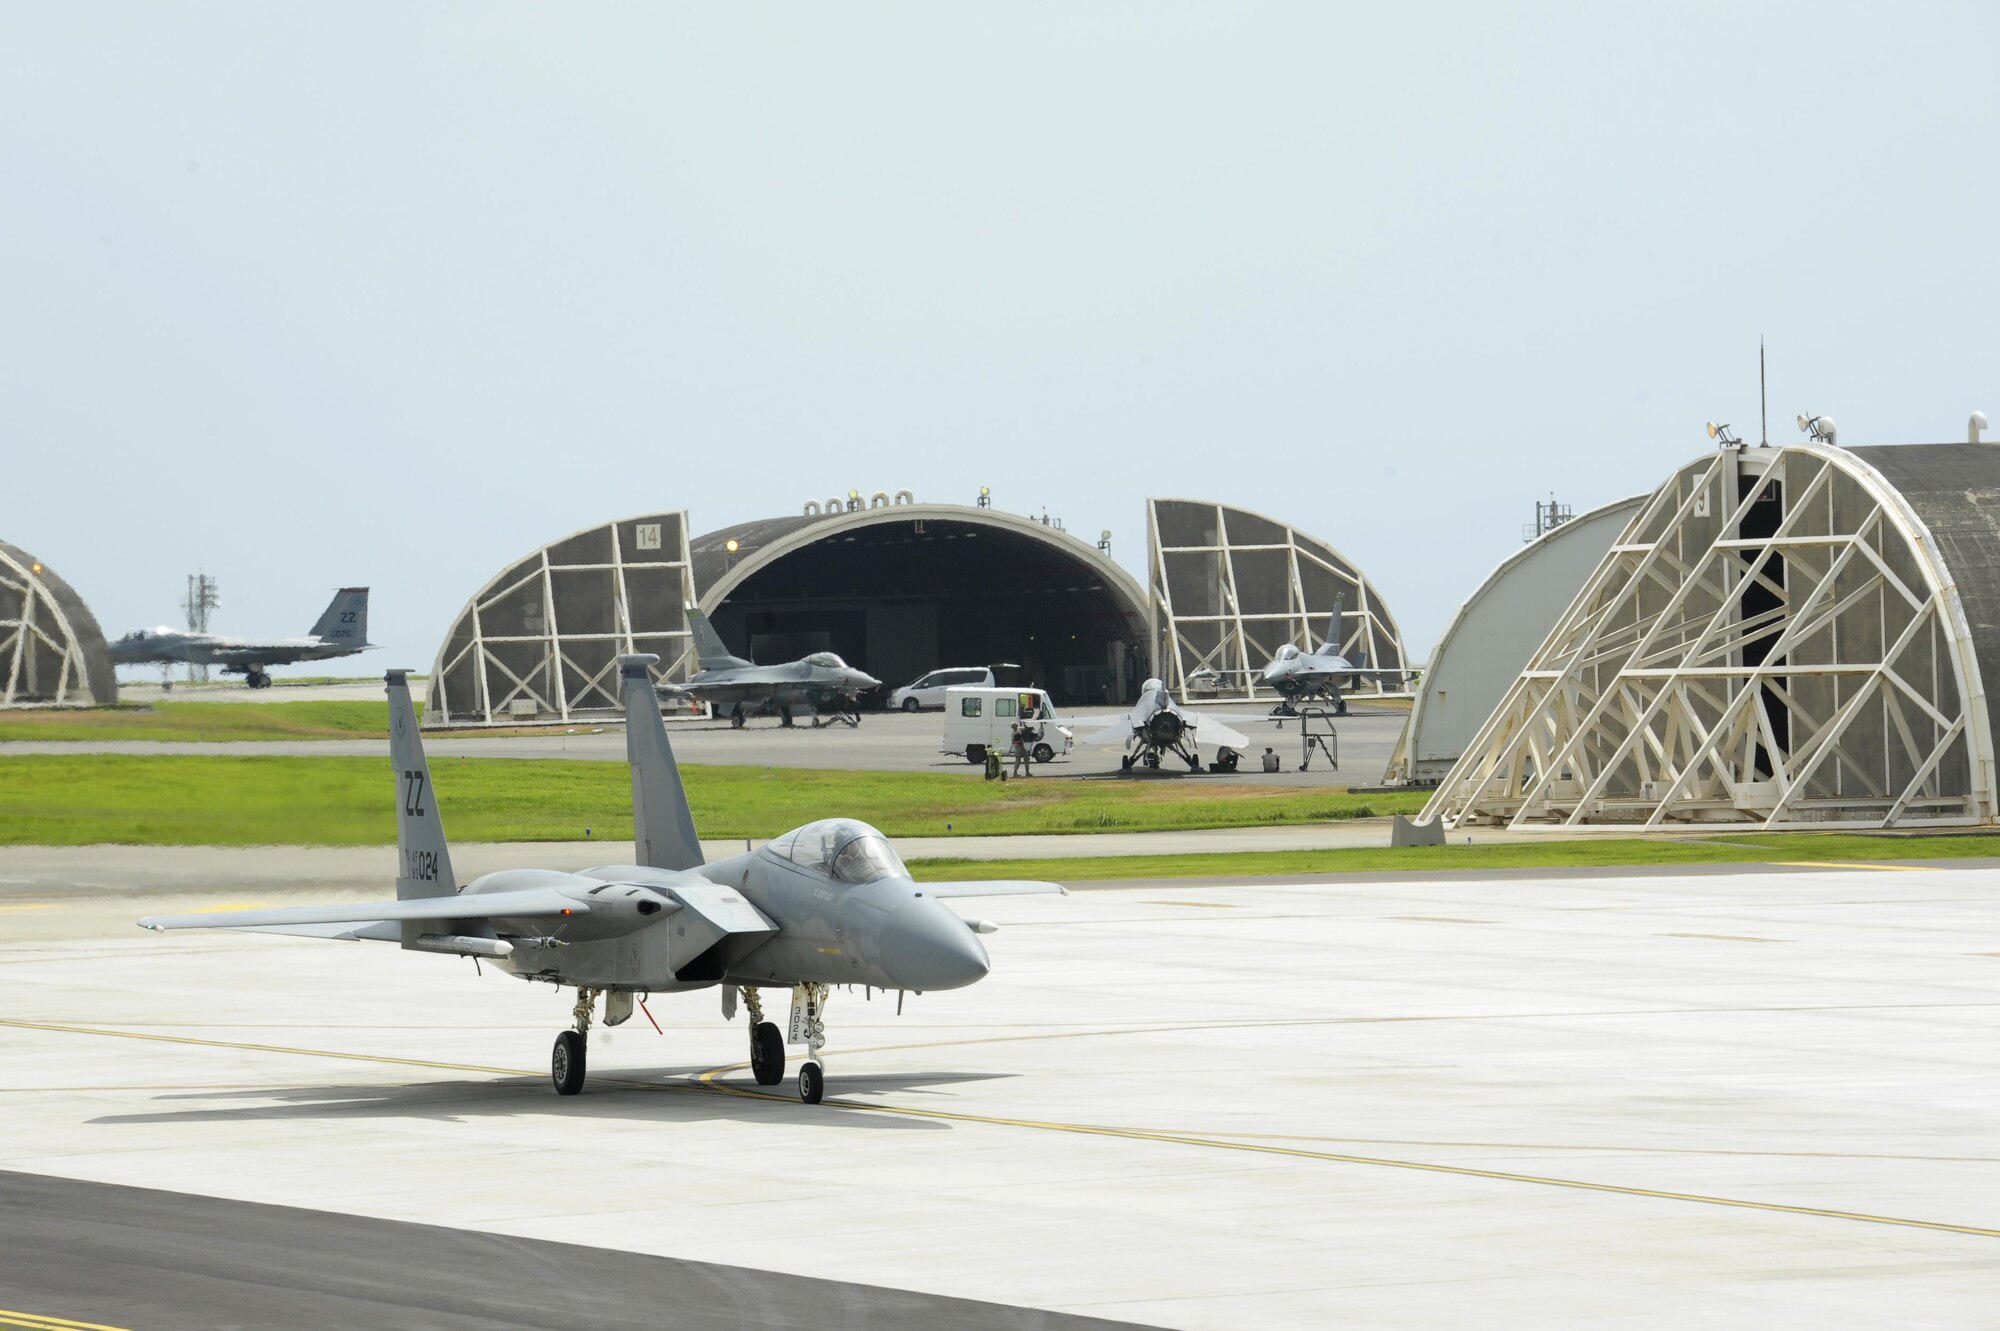 A U.S. Air Force F-15 Eagle from the 44th Fighter Squadron taxis after landing during a large force exercise on Kadena Air Base, Japan, July 30, 2015. The fighter jets were in charge of gaining air superiority while protecting ground troops and rescue helicopters during the exercise. (U.S. Air Force photo by Airman 1st Class Zackary A. Henry/Released)
